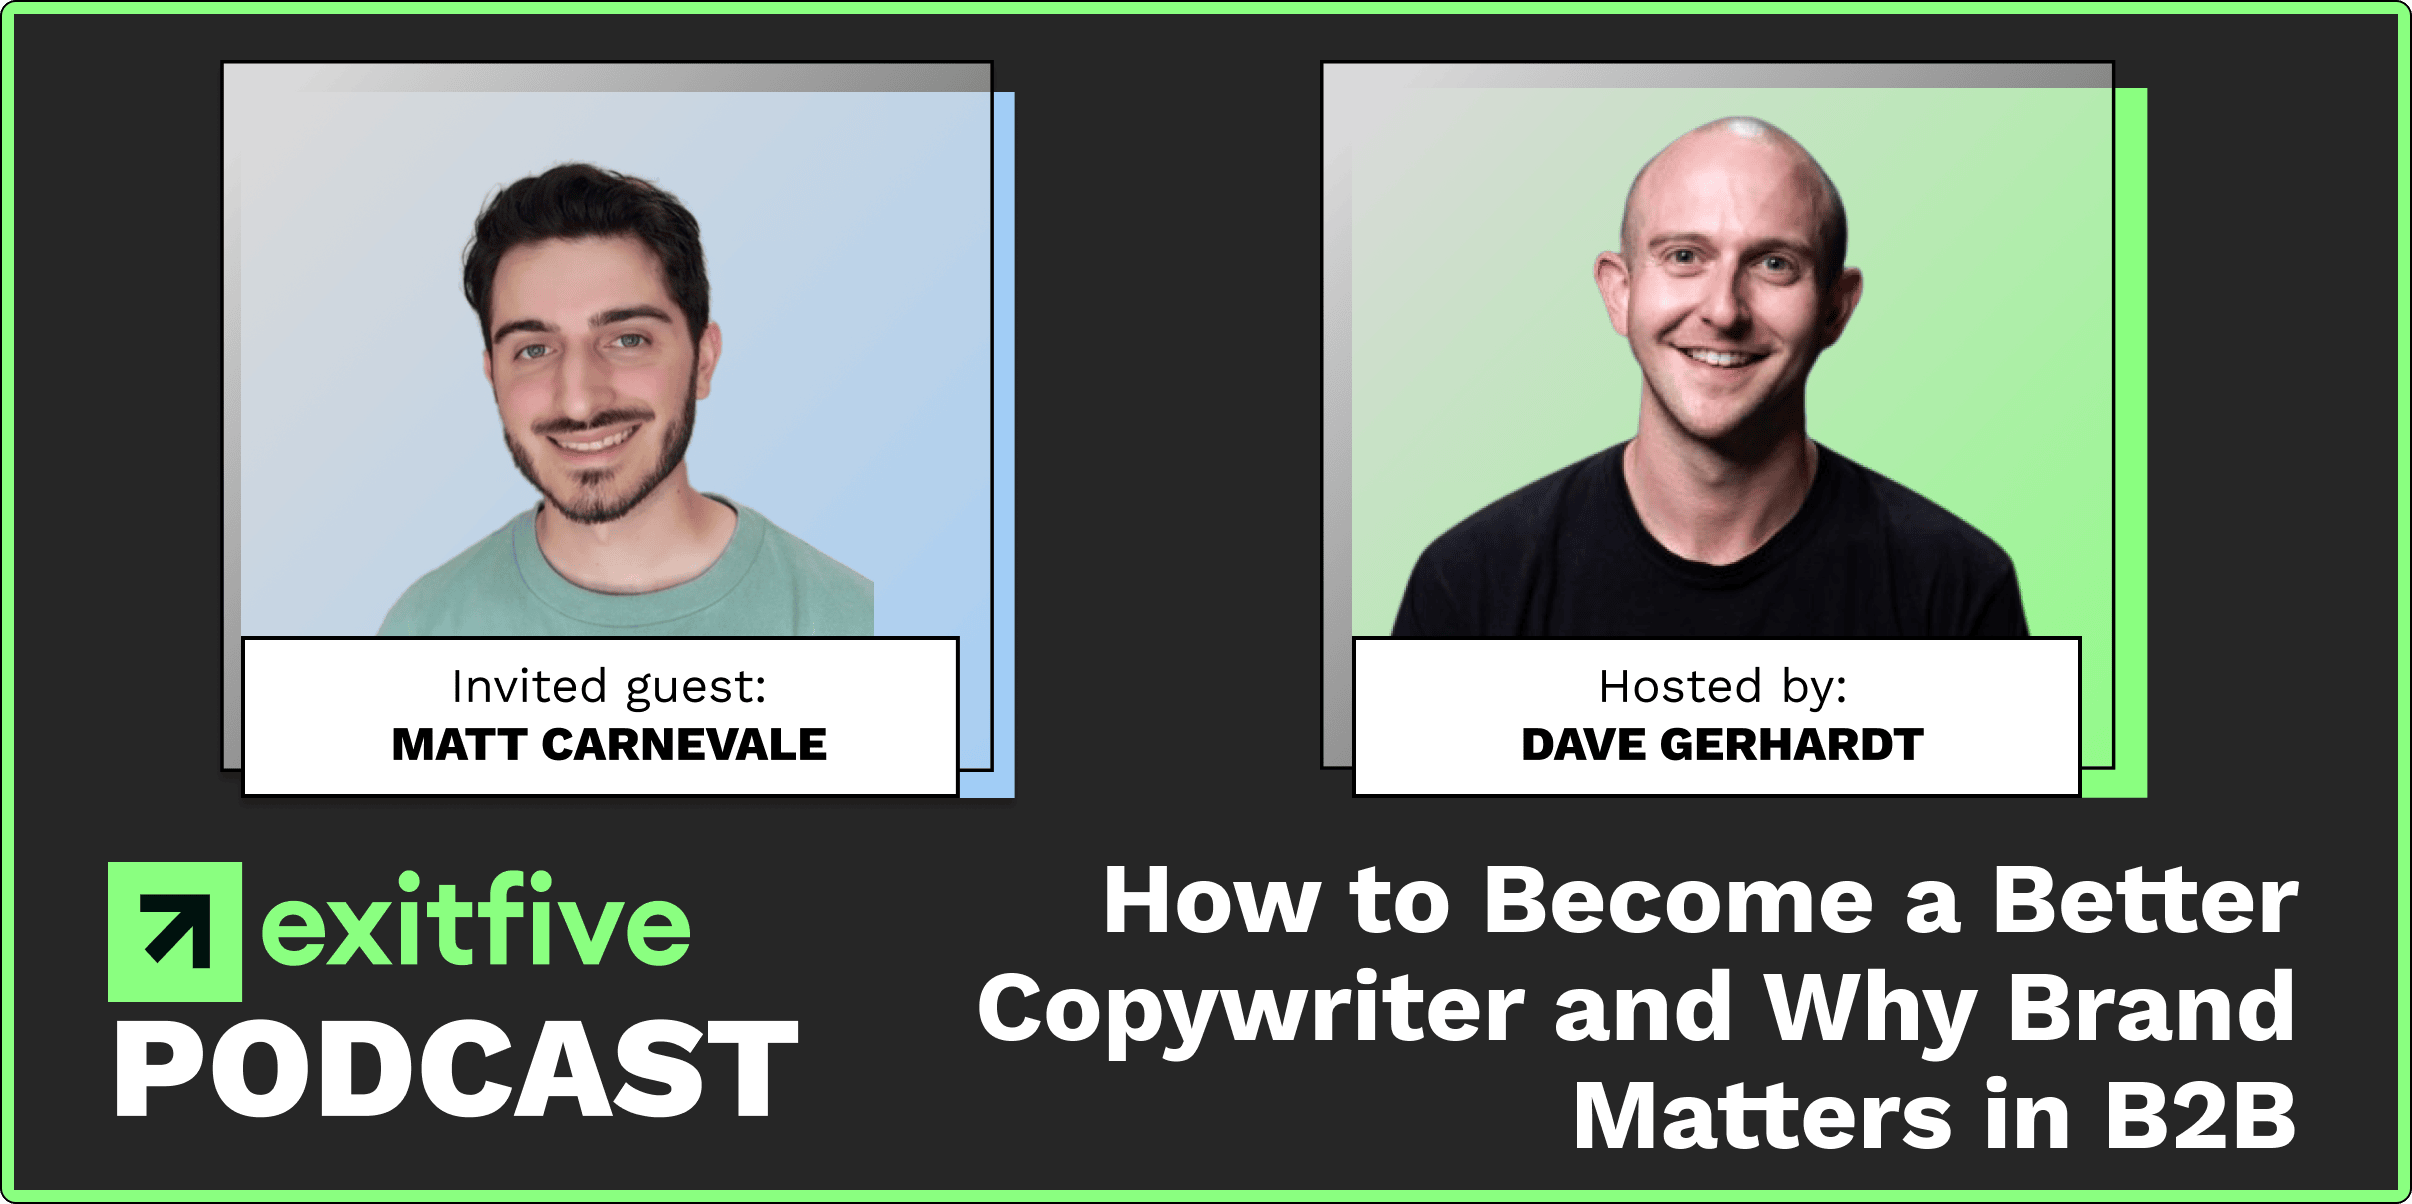 Inside exitfive | Do Nurture Sequences Work? How to Become a Better Copywriter and Why Brand Matters in B2B